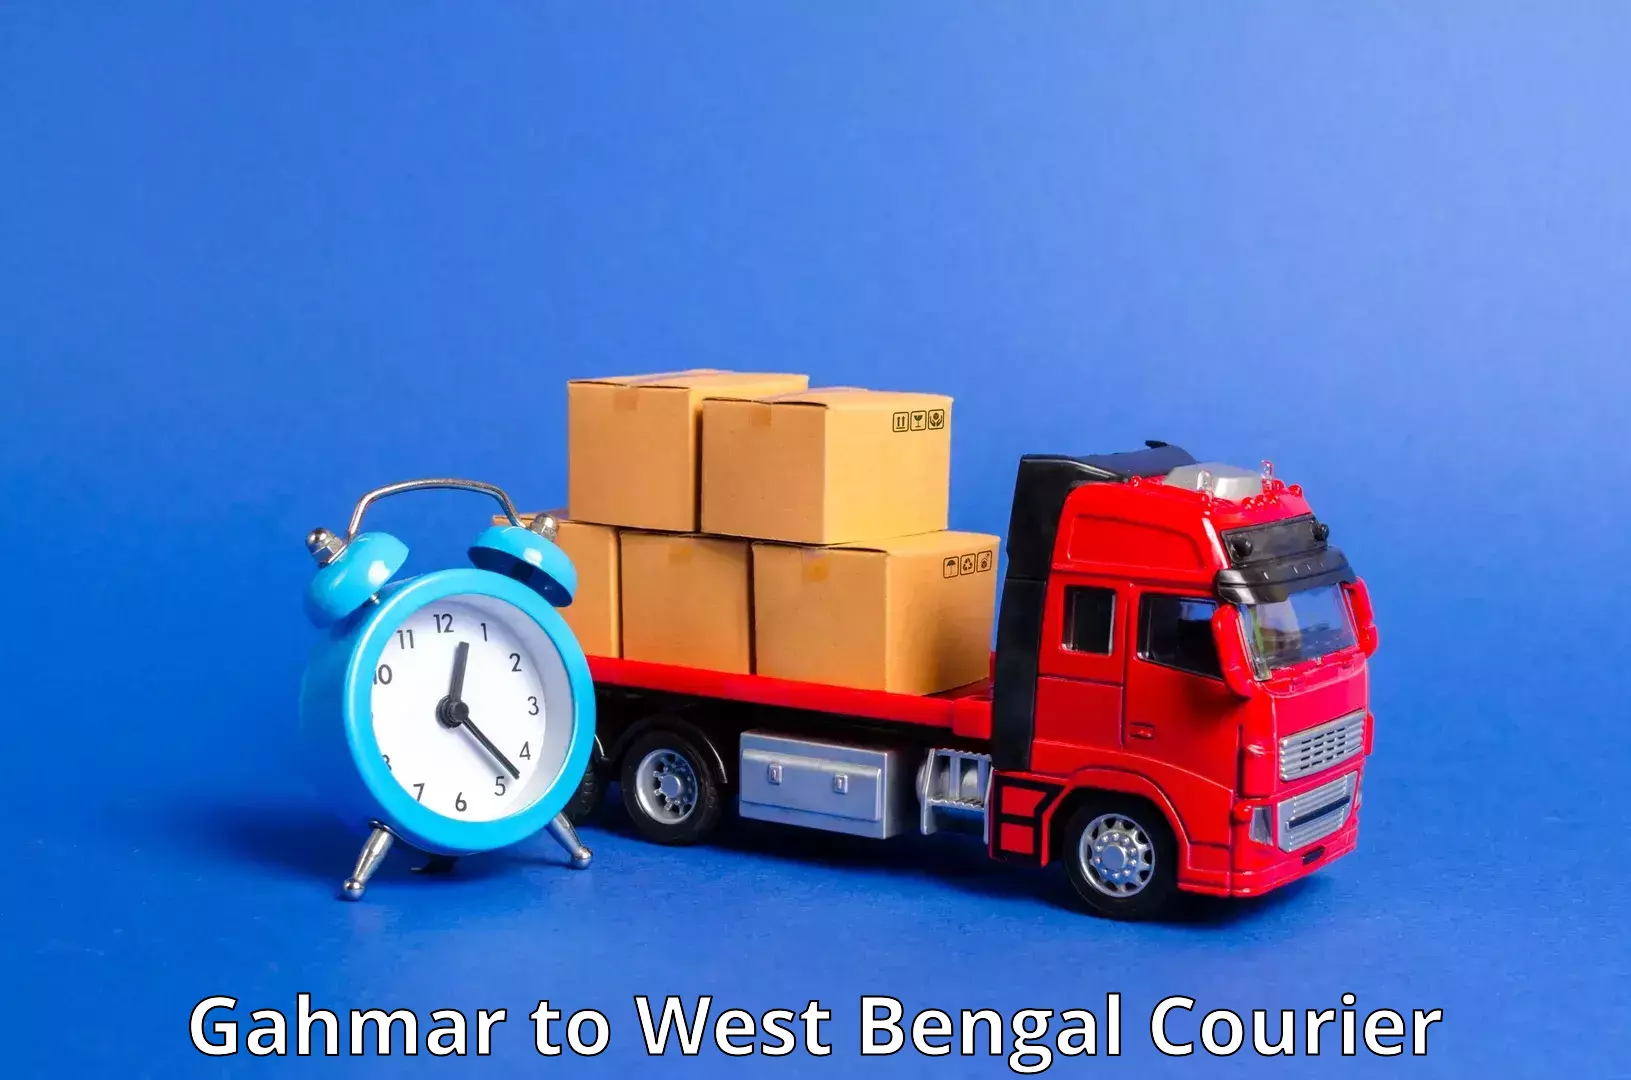 Fast delivery service Gahmar to West Bengal